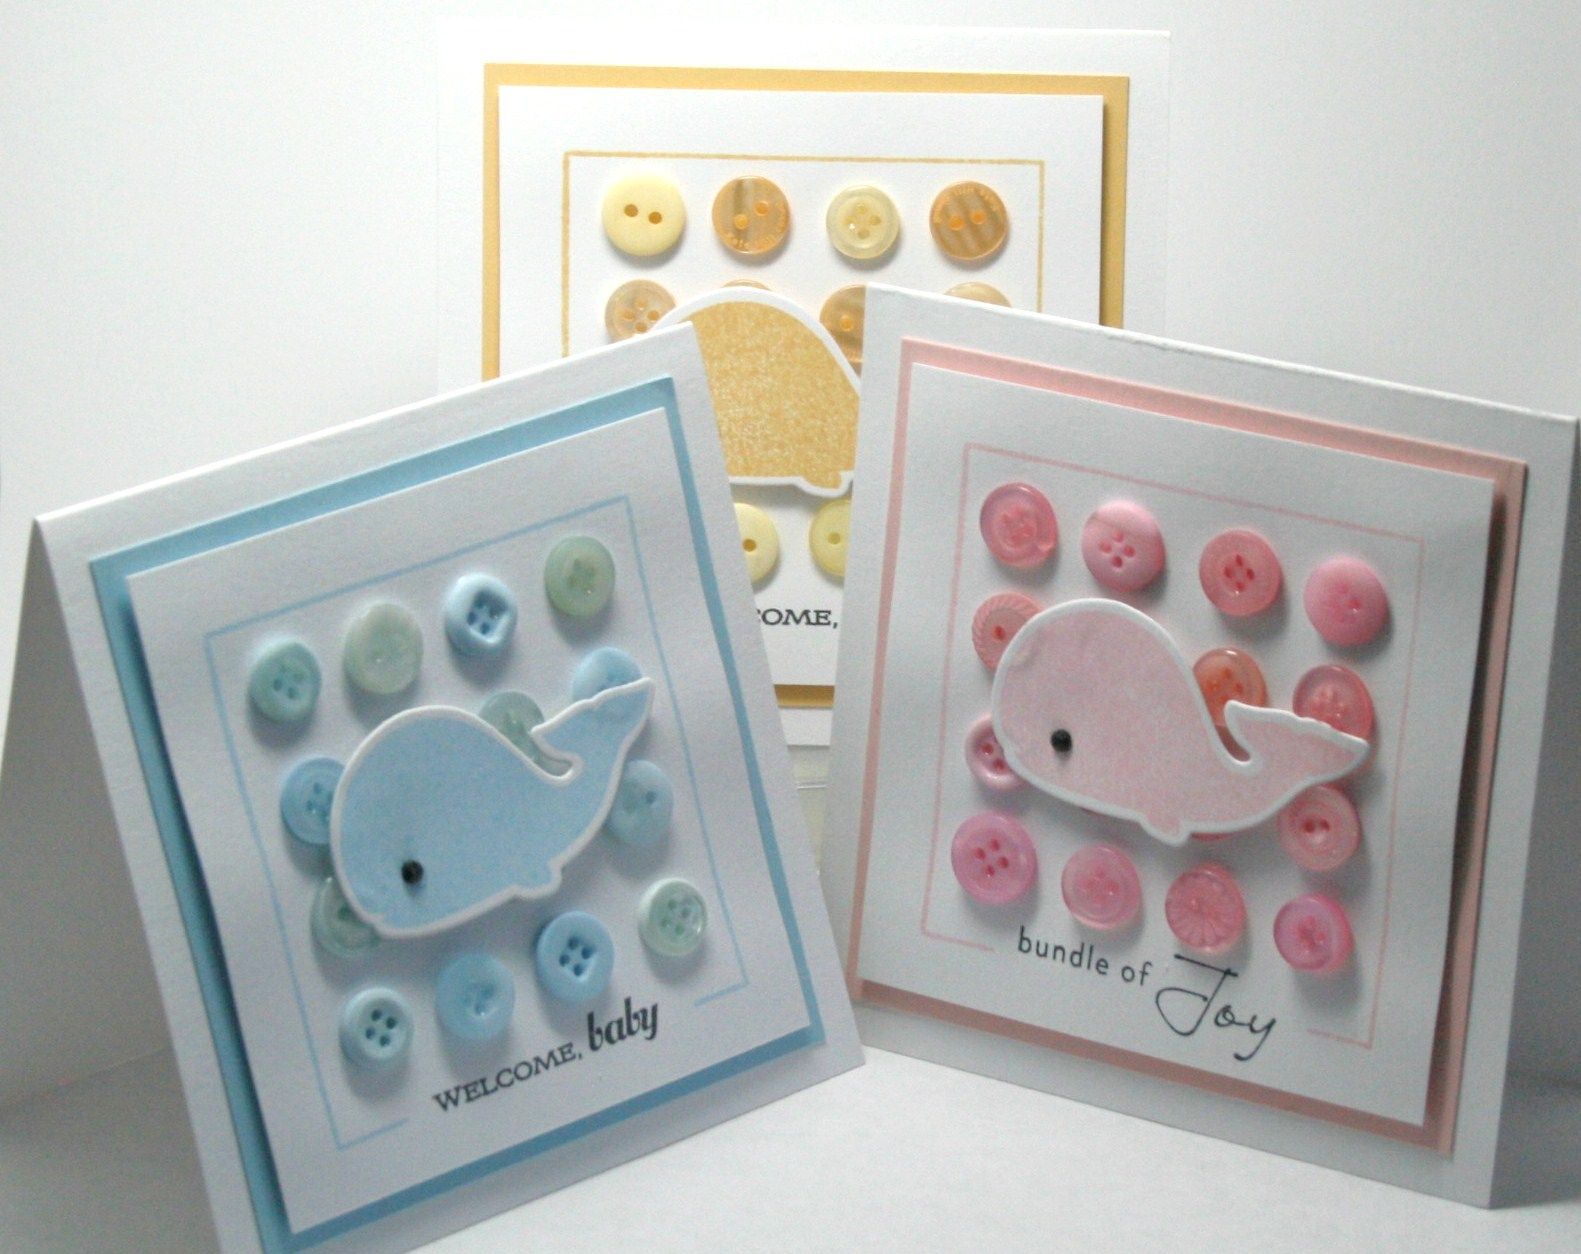 Make use of those baby stamps & buttons